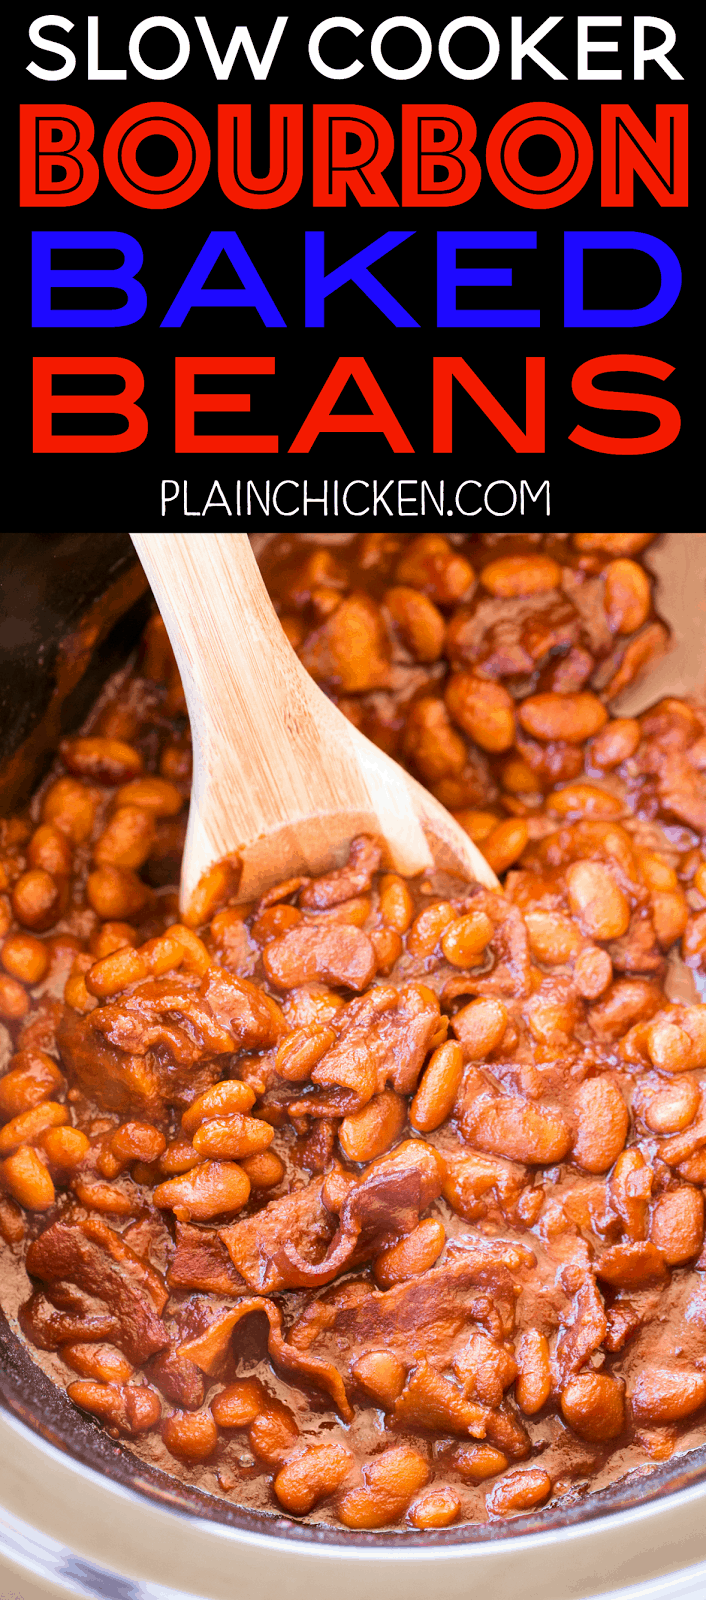 Slow Cooker Bourbon Baked Beans - seriously delicious! We love these easy baked beans! Great for potlucks and cookouts. Just dump everything in the slow cooker and let it work its magic! Northern beans, bourbon, tomato paste, molasses, mustard, Worcestershire, onion, garlic, bacon. Everyone RAVED about these beans and asked for the recipe. You can't go wrong with this easy slow cooker side dish recipe.